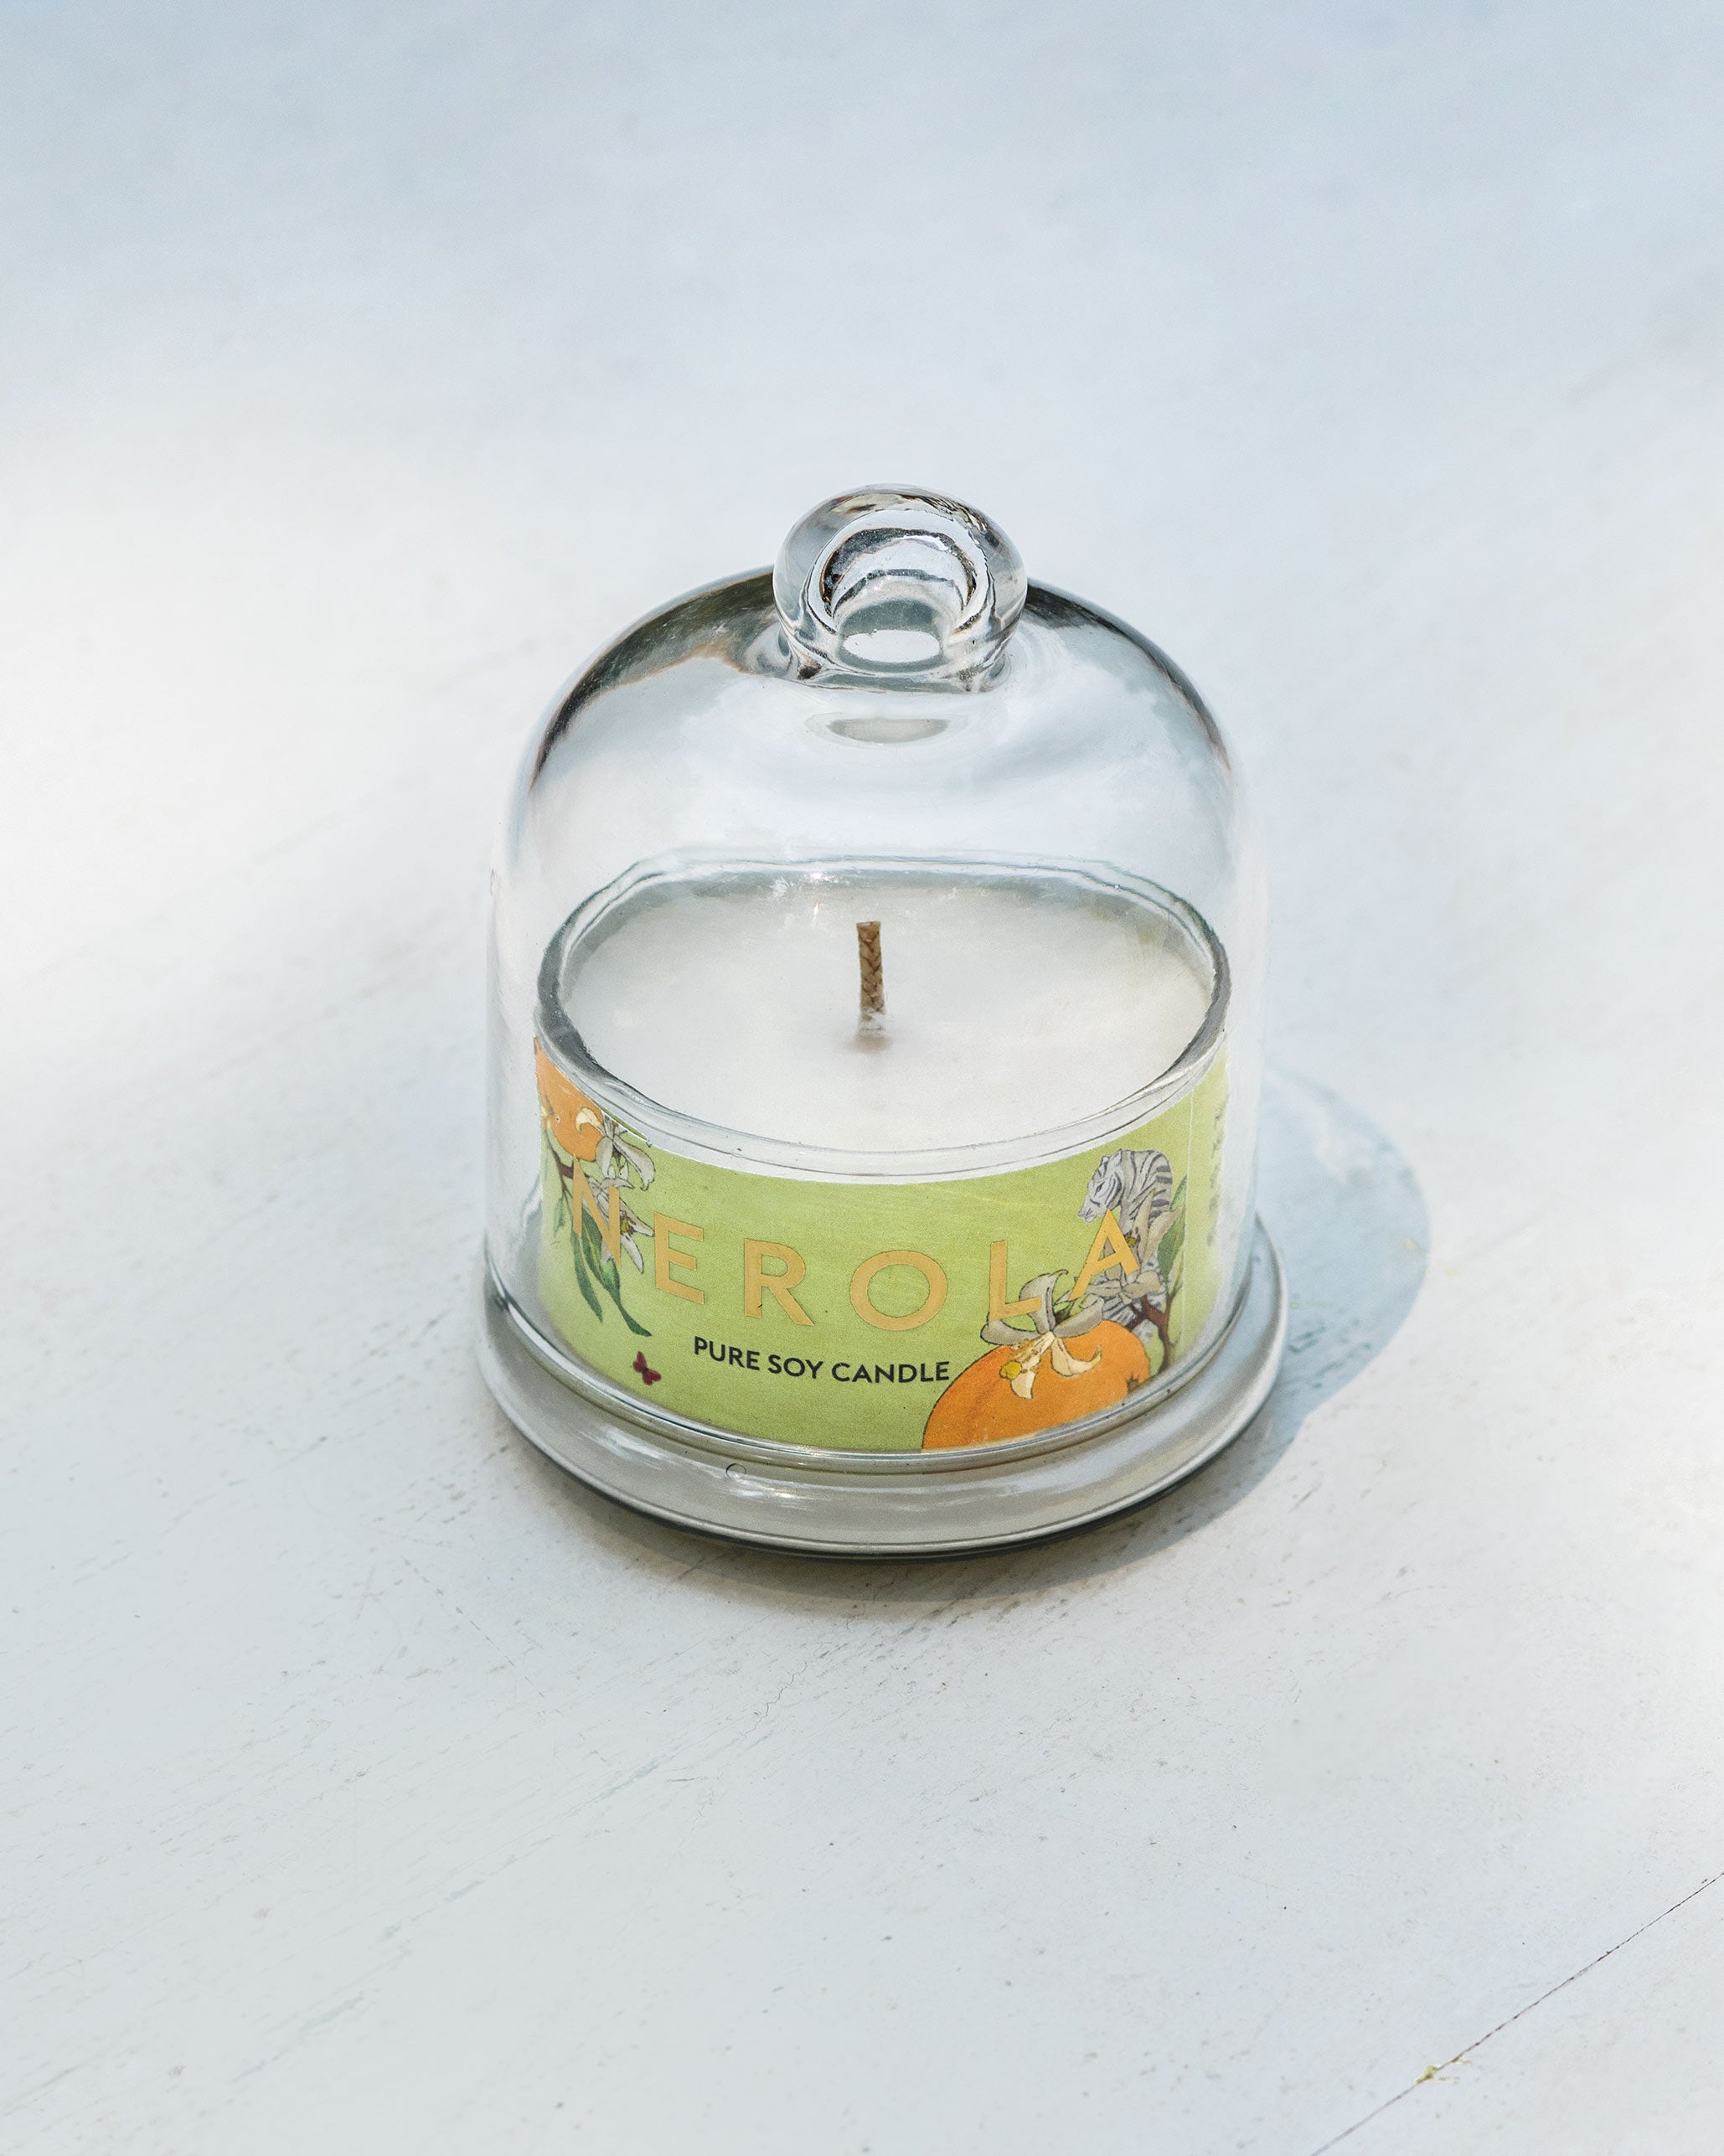 NEROLA Bell Jar Candle - Small